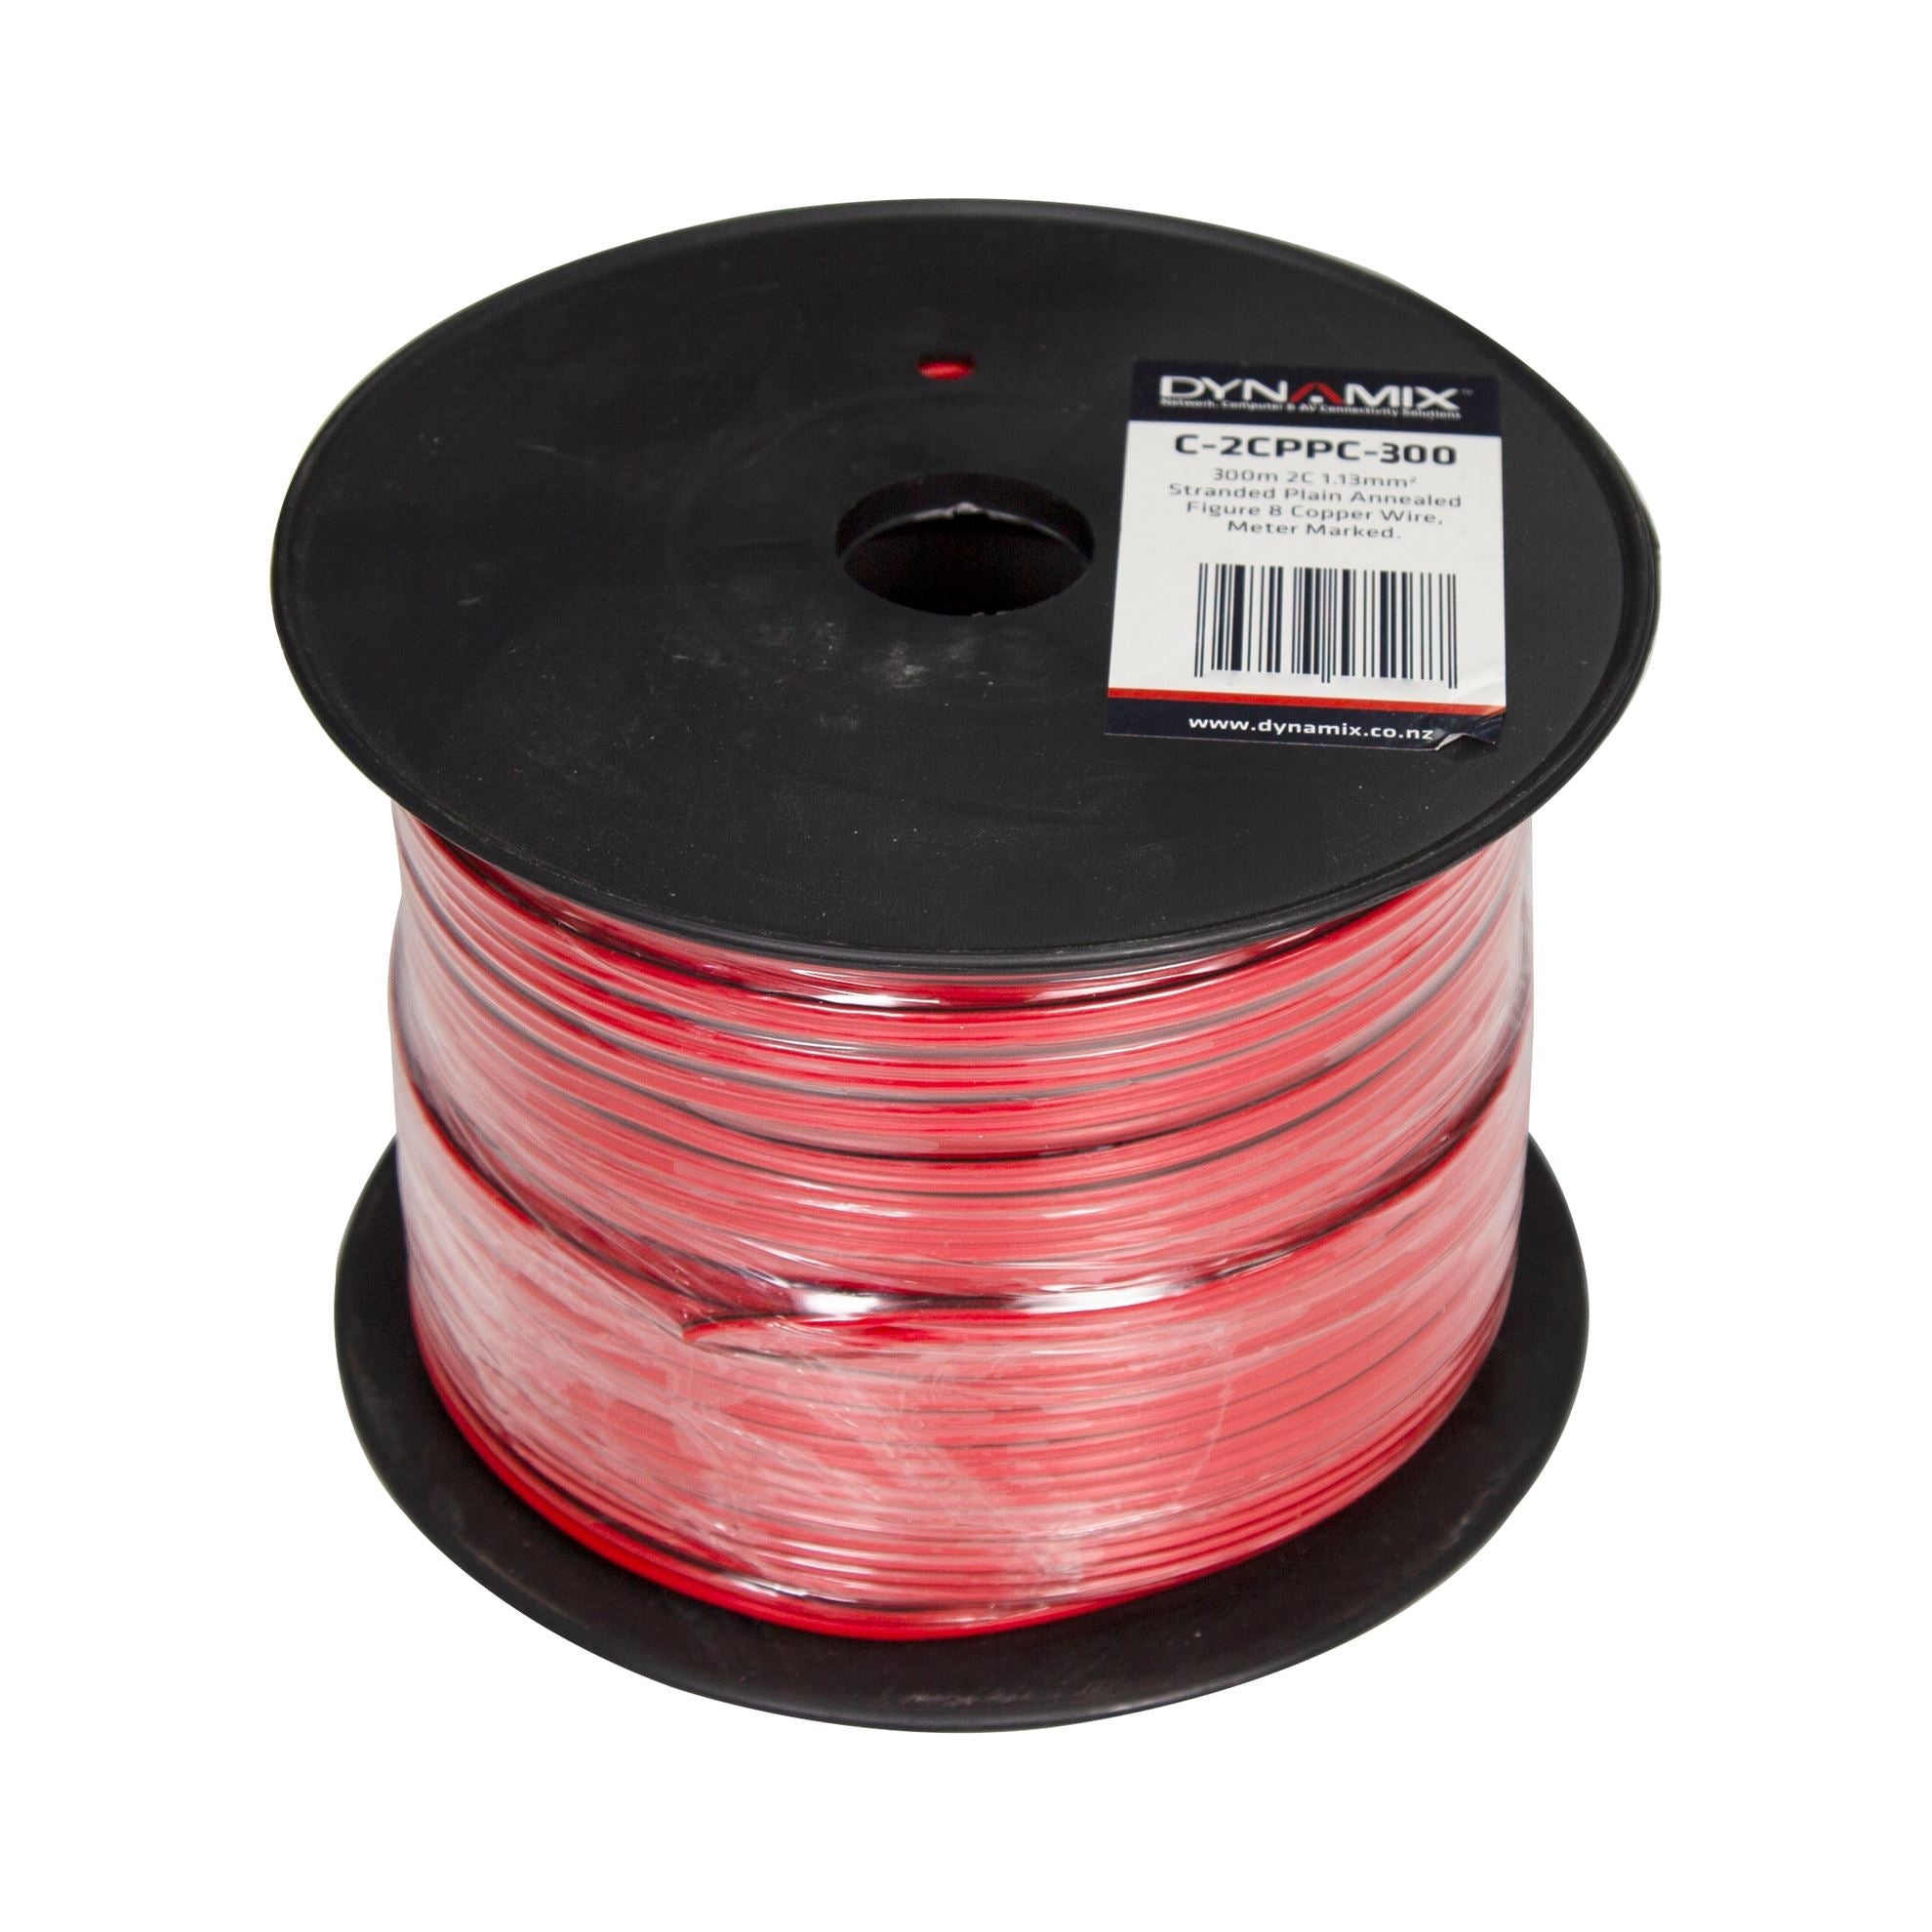 DYNAMIX_300m_2x_Core_1.13mm_Bare_Copper,_Red/Black_Trace_Figure_8x_Parallel_Power_Cable,_Meter_Marked,_16/03_x_2_CORE_V-90_50V_AC/120V